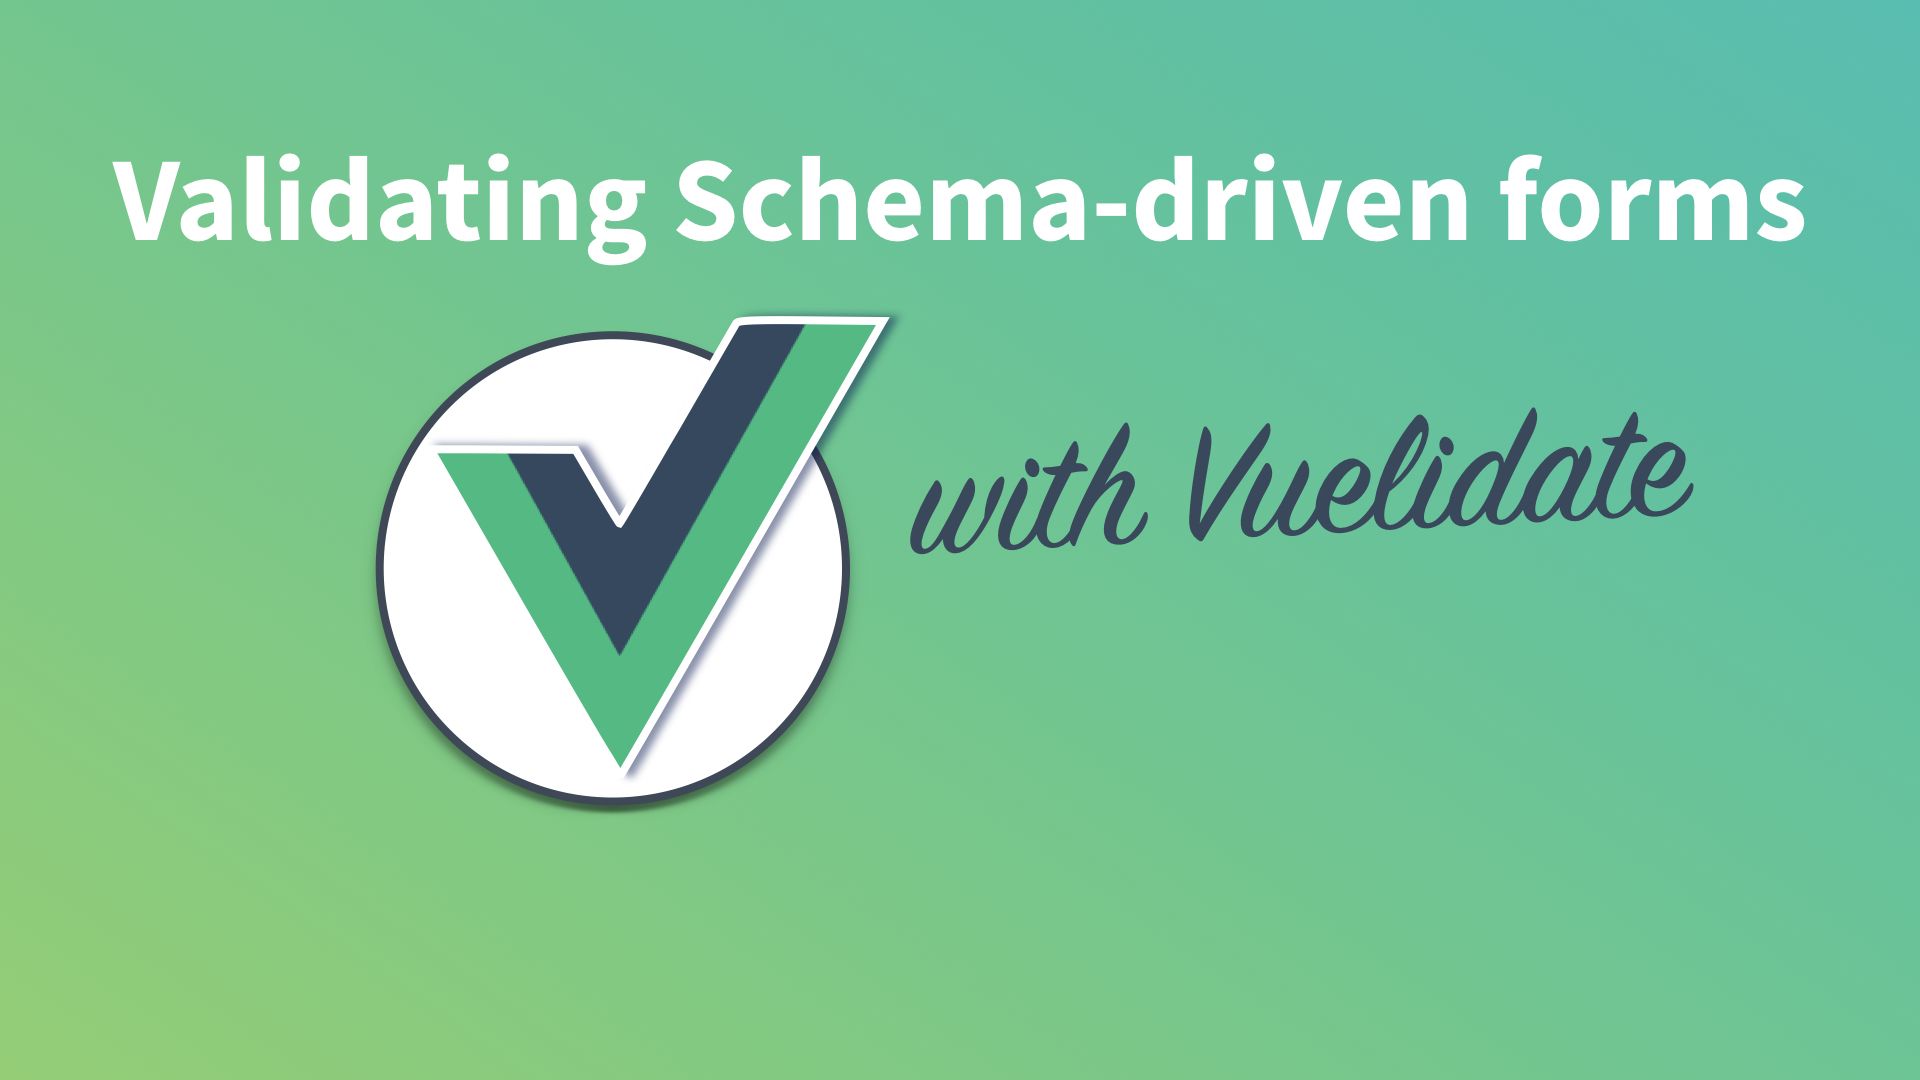 Validating Schema-Driven forms with Vuelidate